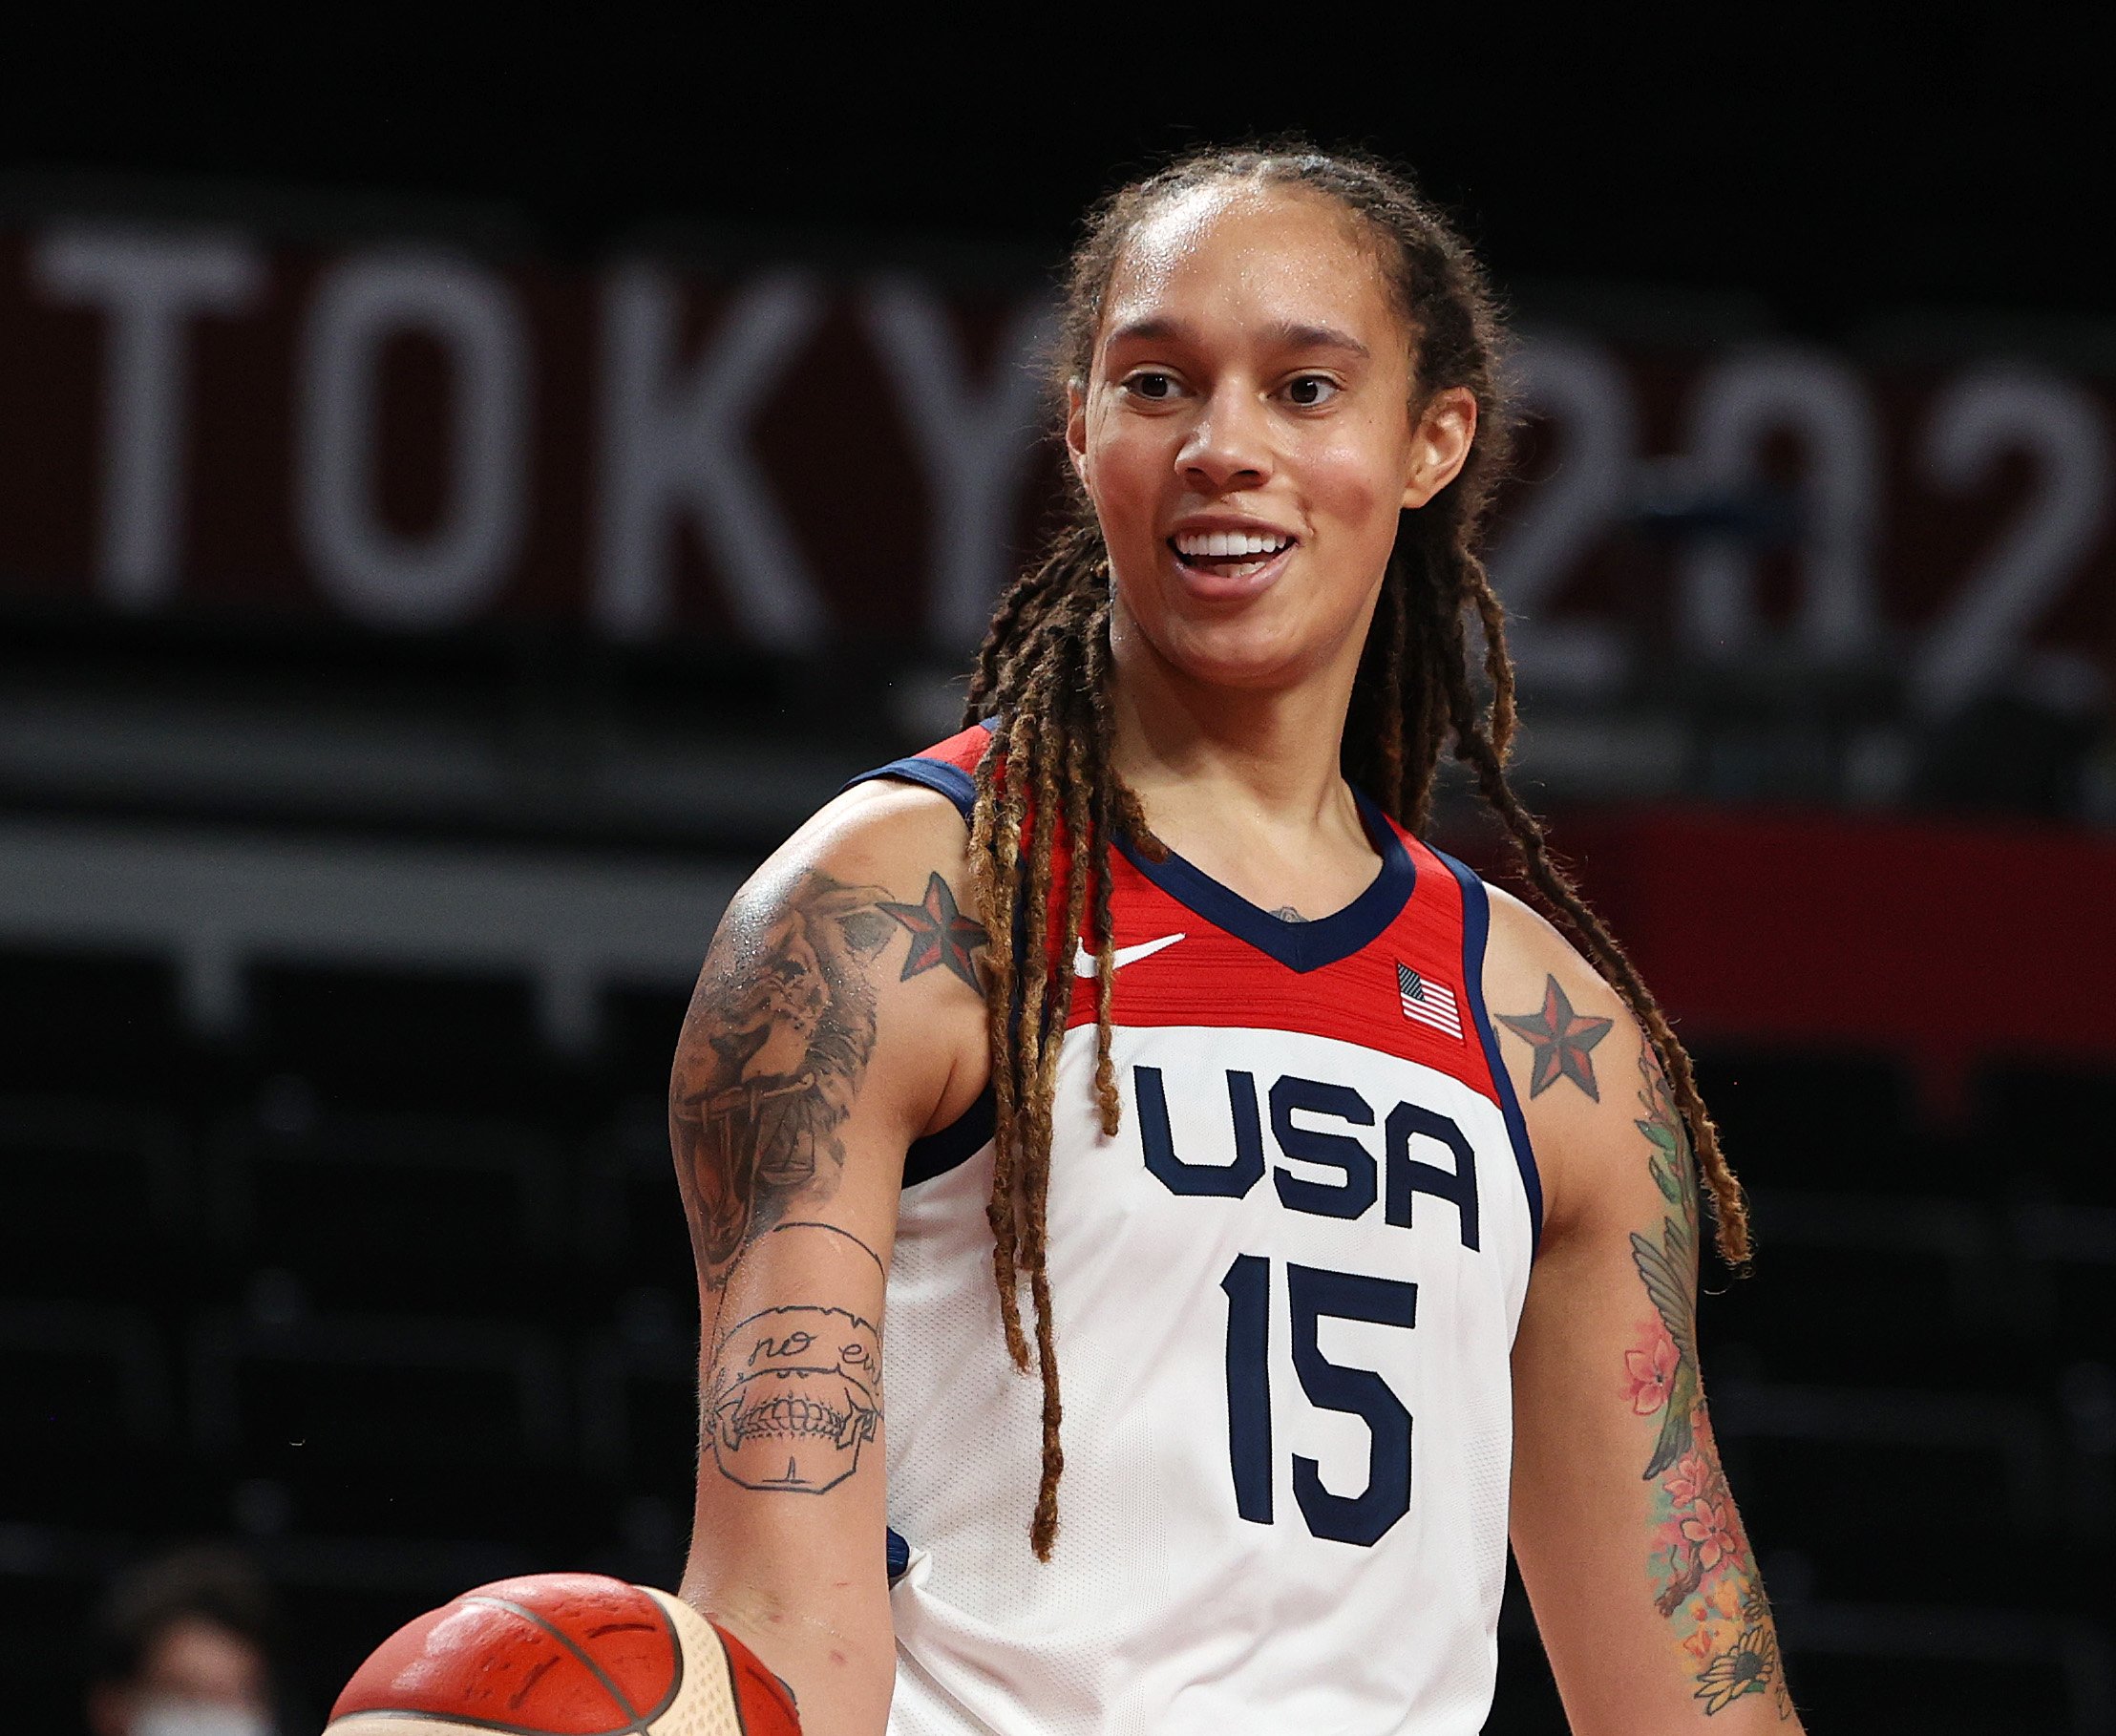 Brittney Griner on court while playing at the 2020 Tokyo Olympic games on August 6, 2021, in Japan | Source: Getty Images